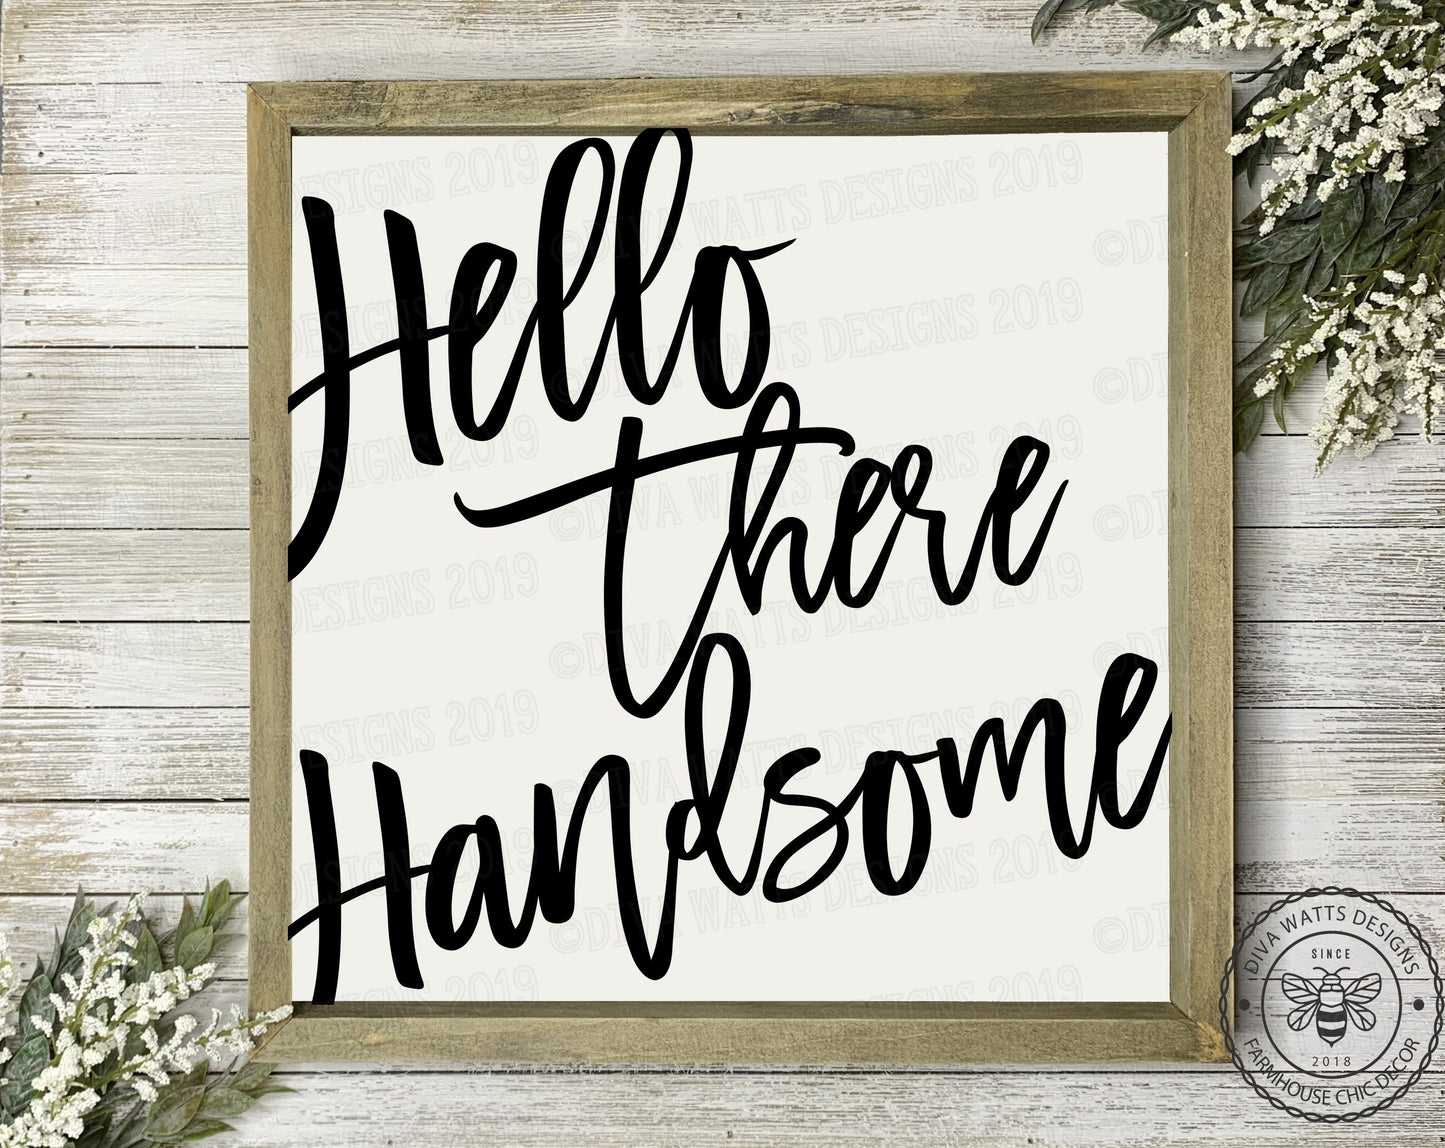 SVG Good Morning Gorgeous | Hello There Handsome | Bedroom Bathroom Cutting File | Instant Download Farmhouse DXF PNG eps | Vinyl Stencil